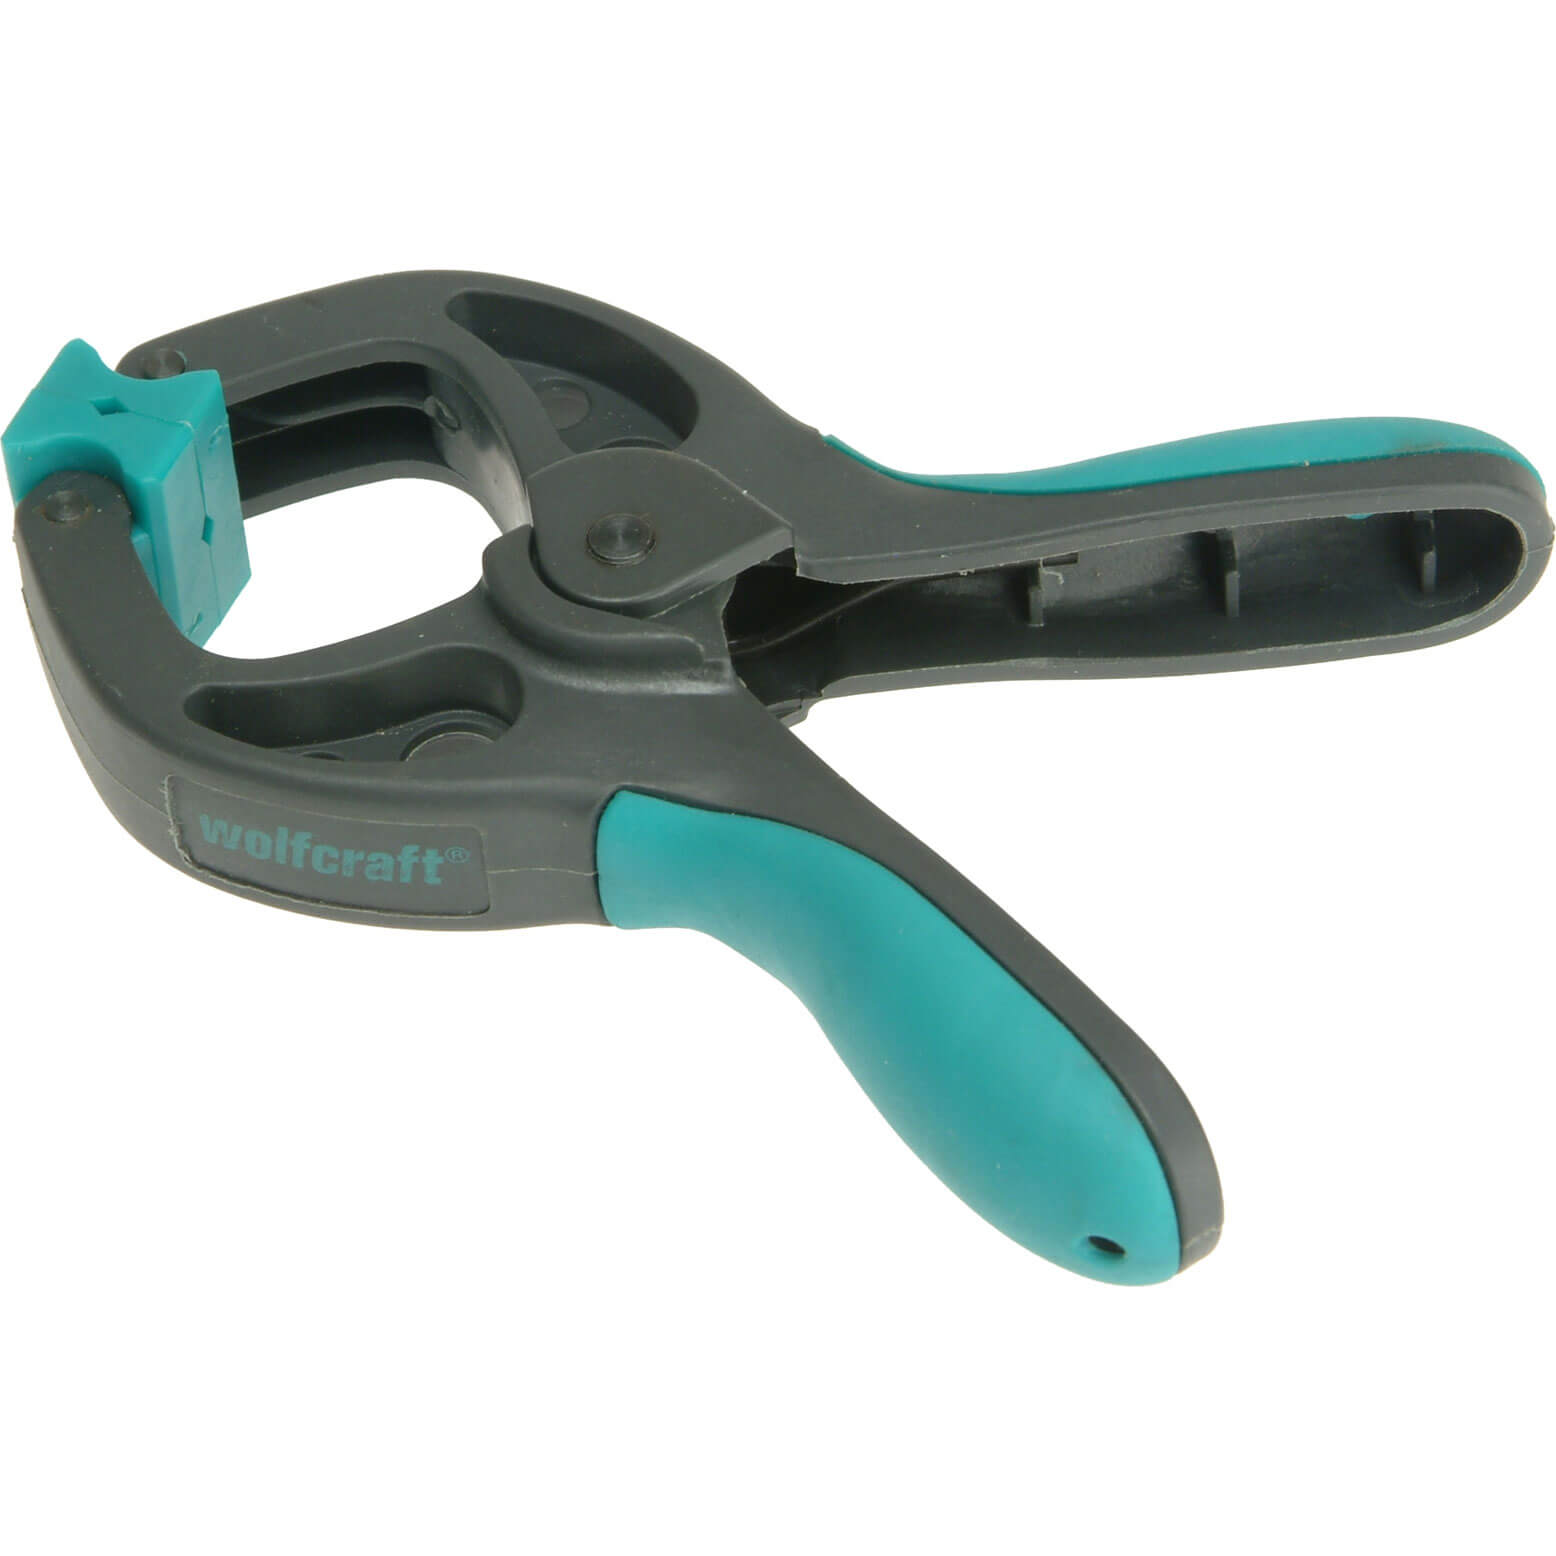 Wolfcraft Plastic Spring Clamp | Spring Clamps